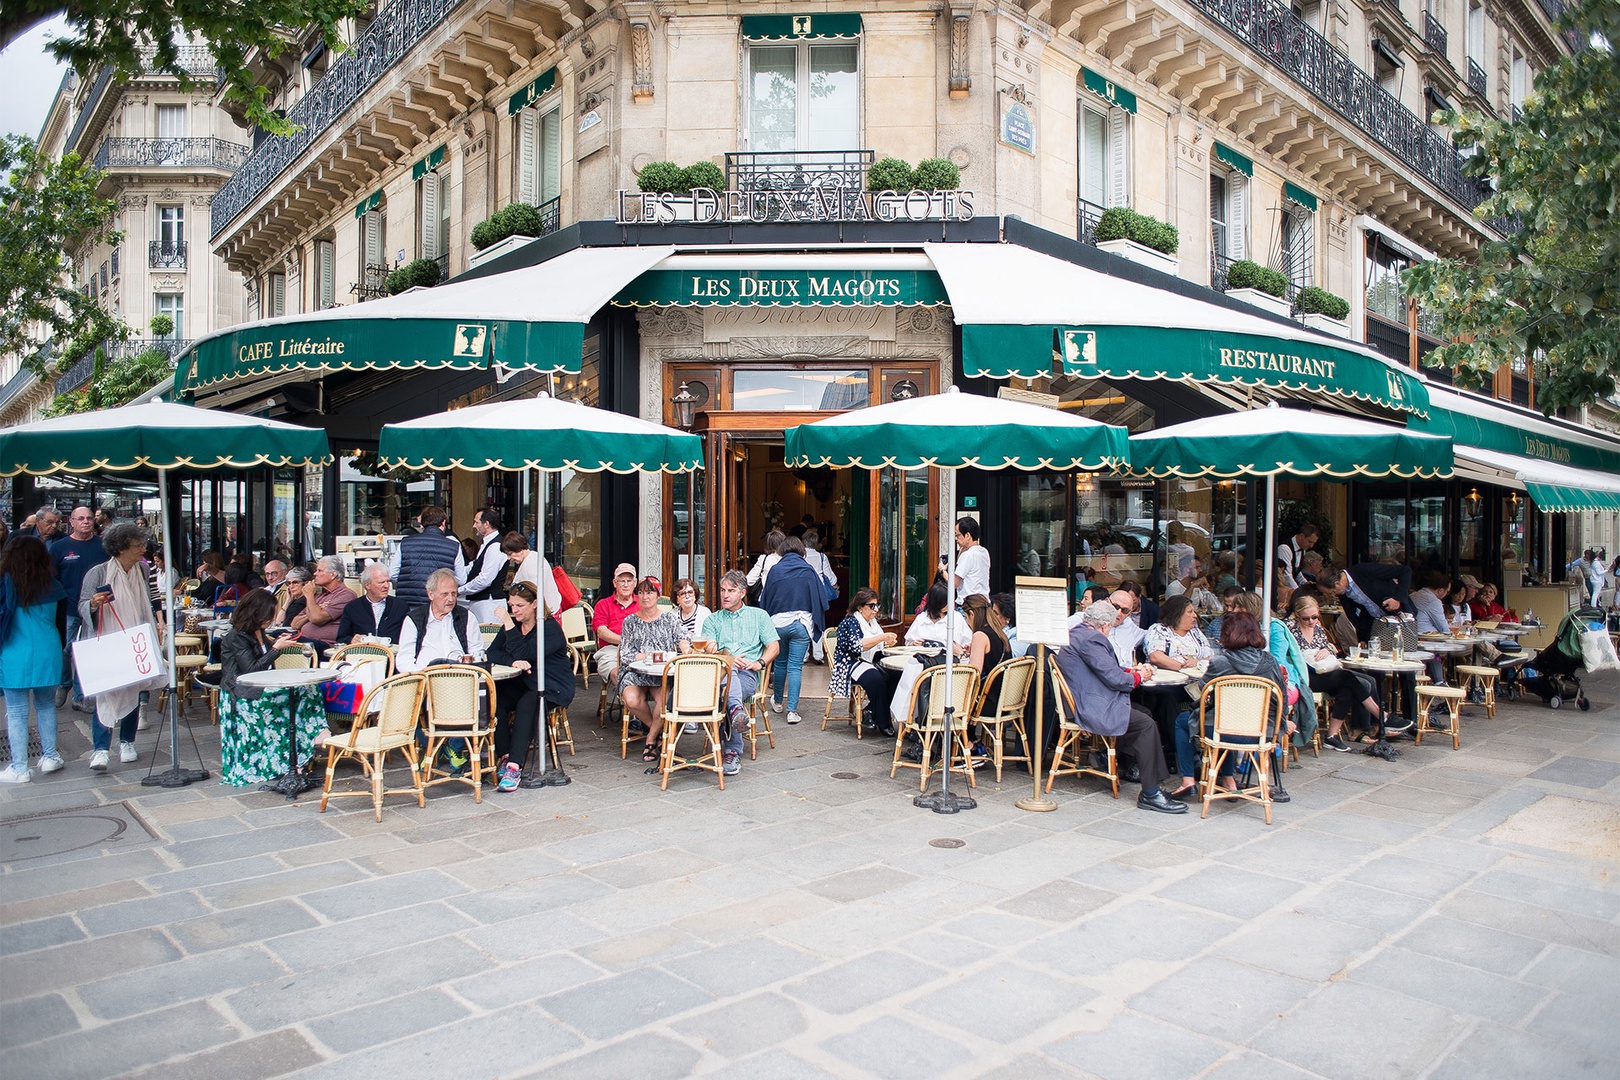 Walk over to the iconic Les Deux Magots cafe.